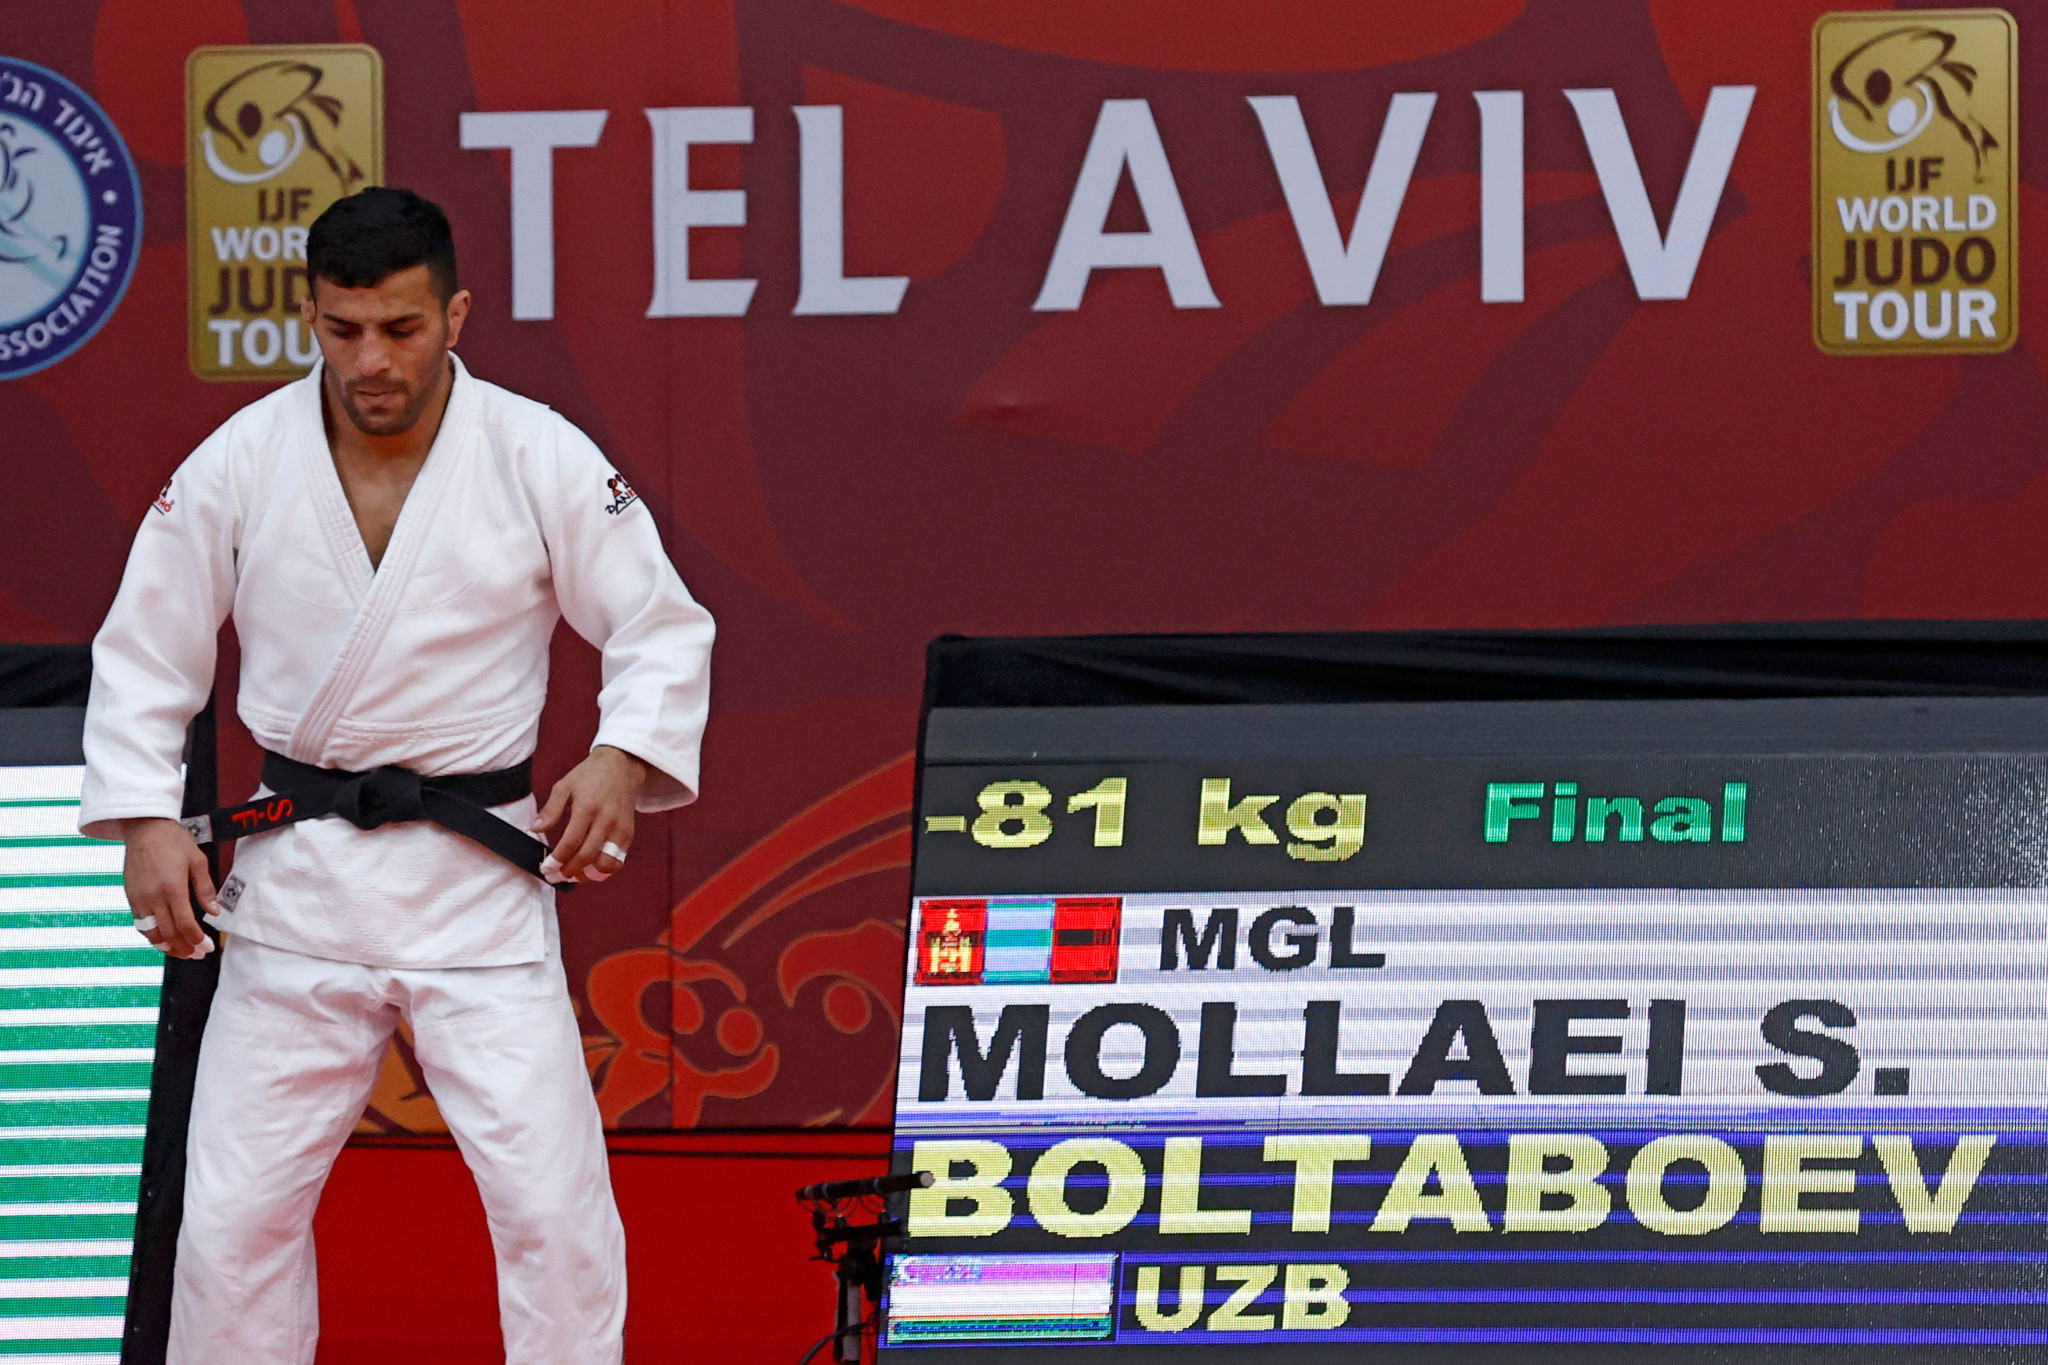 Iranian judoka Saeid Mollaei defected to Mongolia after being ordered to lose on purpose to avoid facing an Israeli opponent ©Getty Images